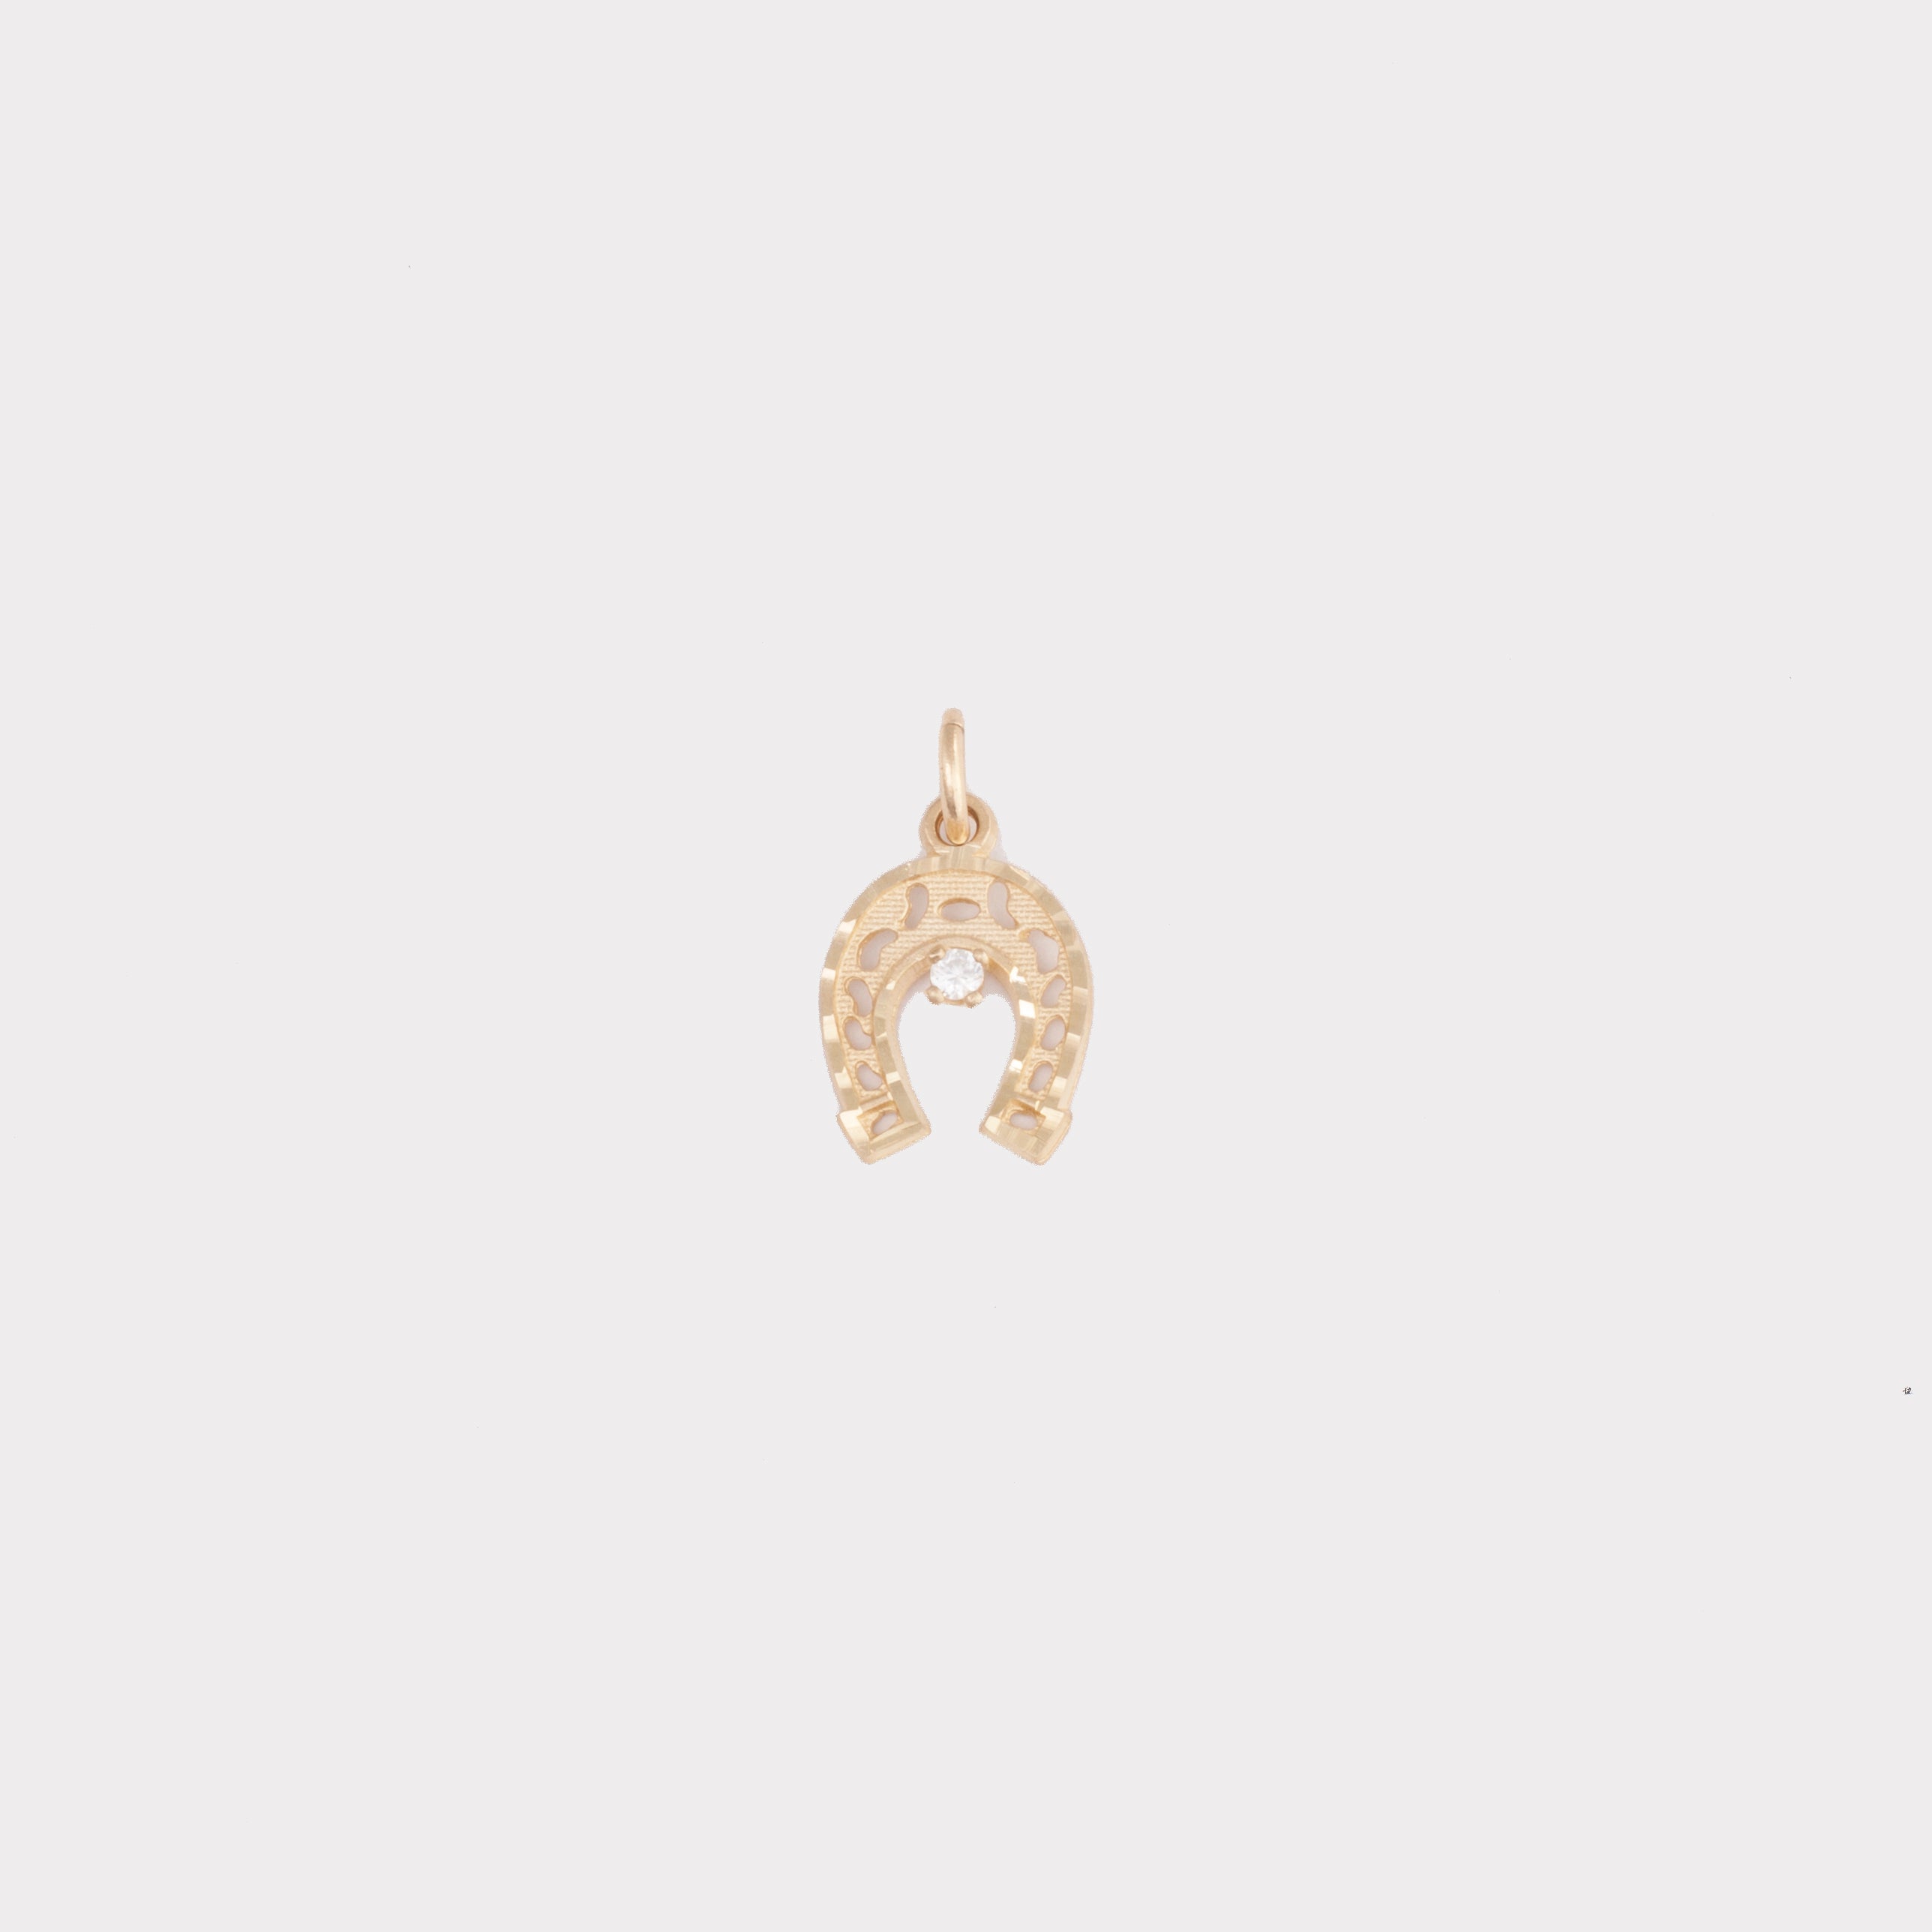 Horseshoe charm with diamond-cut detailing with small cubic zirconia (CZ) stone in the centre.